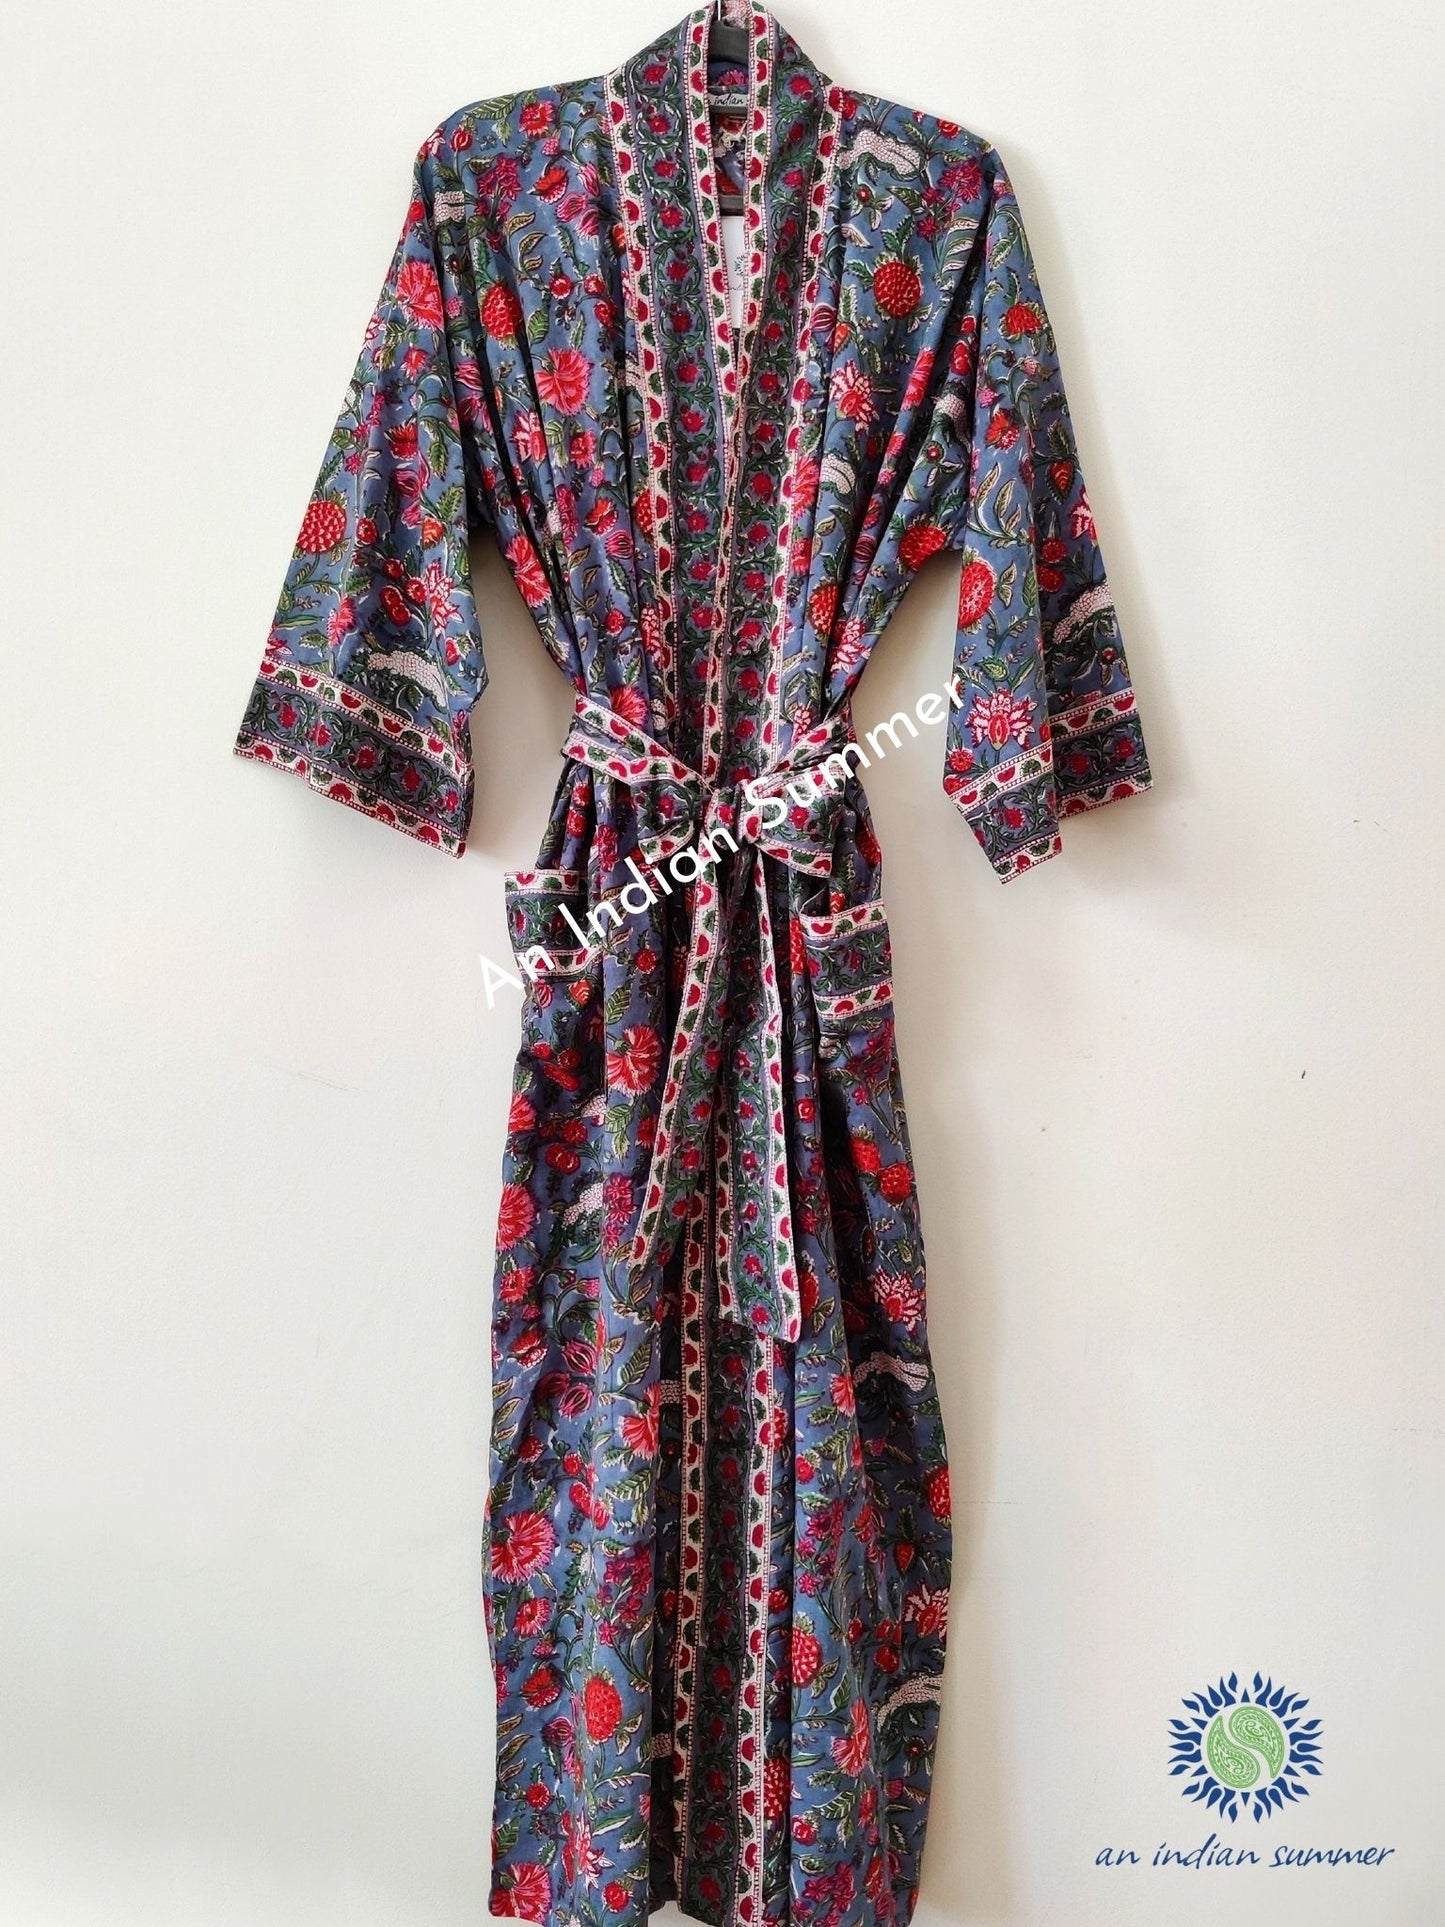 Long Kimono Robe | Jardin | Grey Multicoloured | Floral Block Print | Hand Block Printed | Cotton Voile | An Indian Summer | Seasonless Timeless Sustainable Ethical Authentic Artisan Conscious Clothing Lifestyle Brand